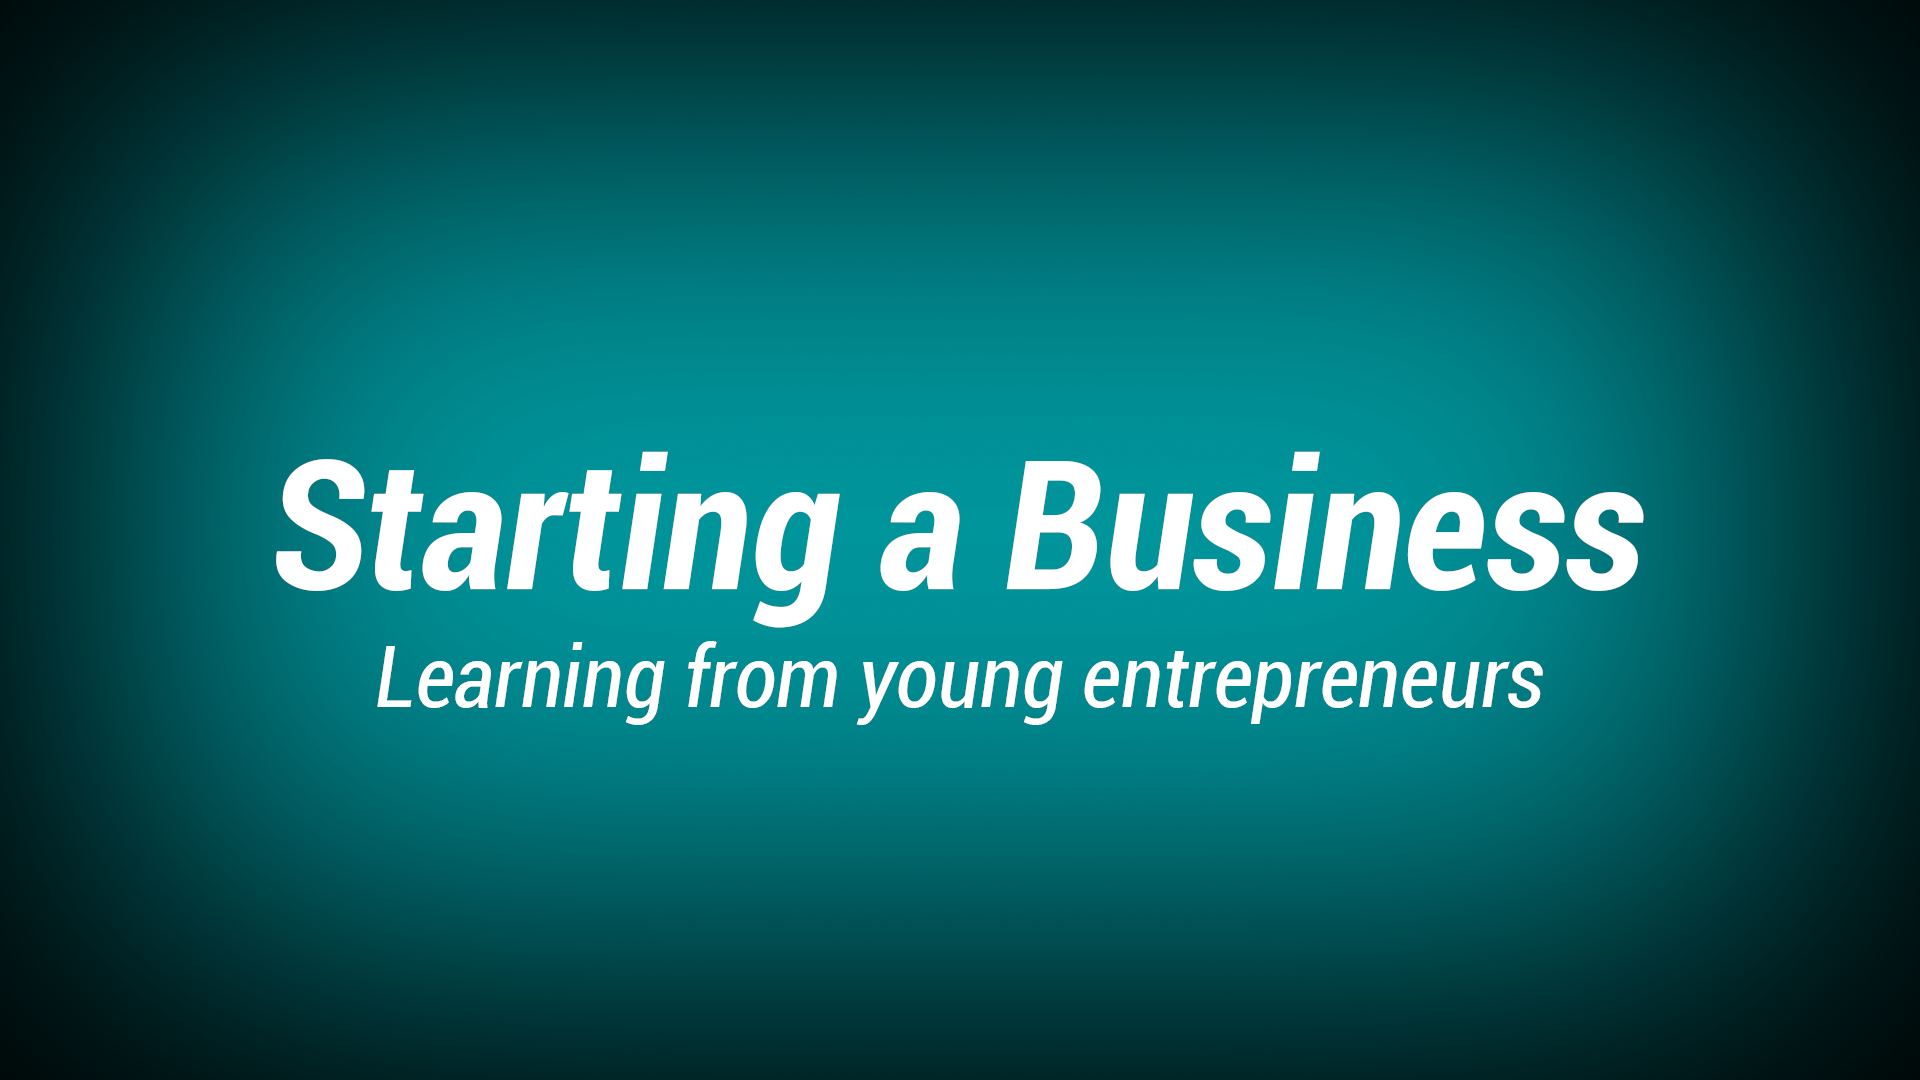 3. Starting a business / The company